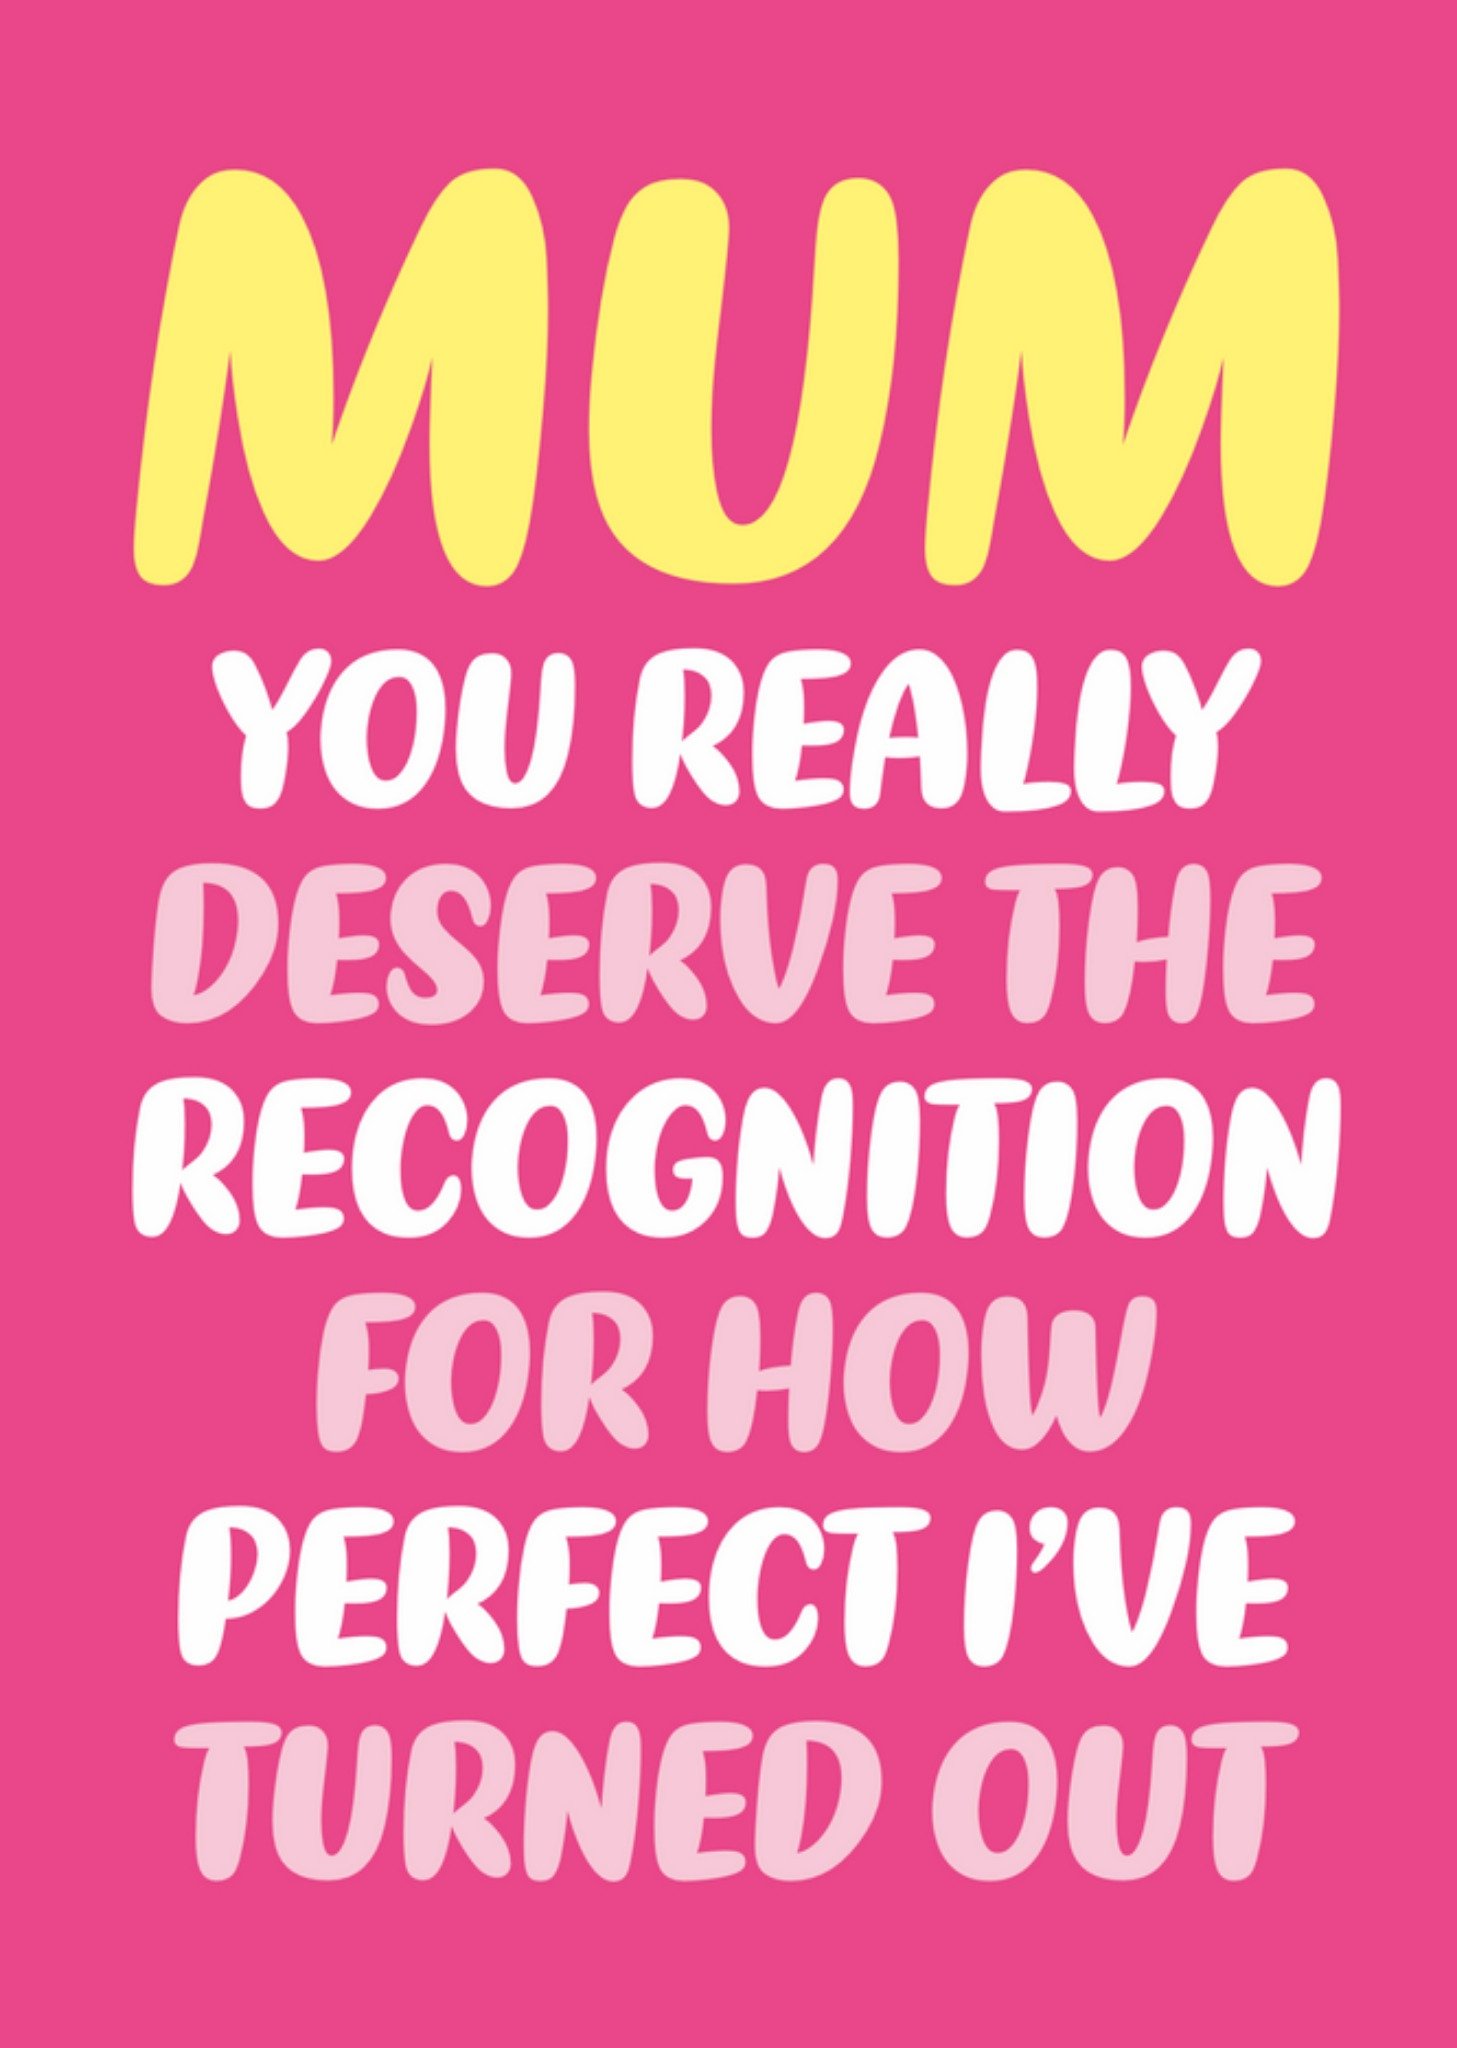 Moonpig Mum You Really Deserve The Recognition For How Perfect I've Turned Out Chunky Text Typograph